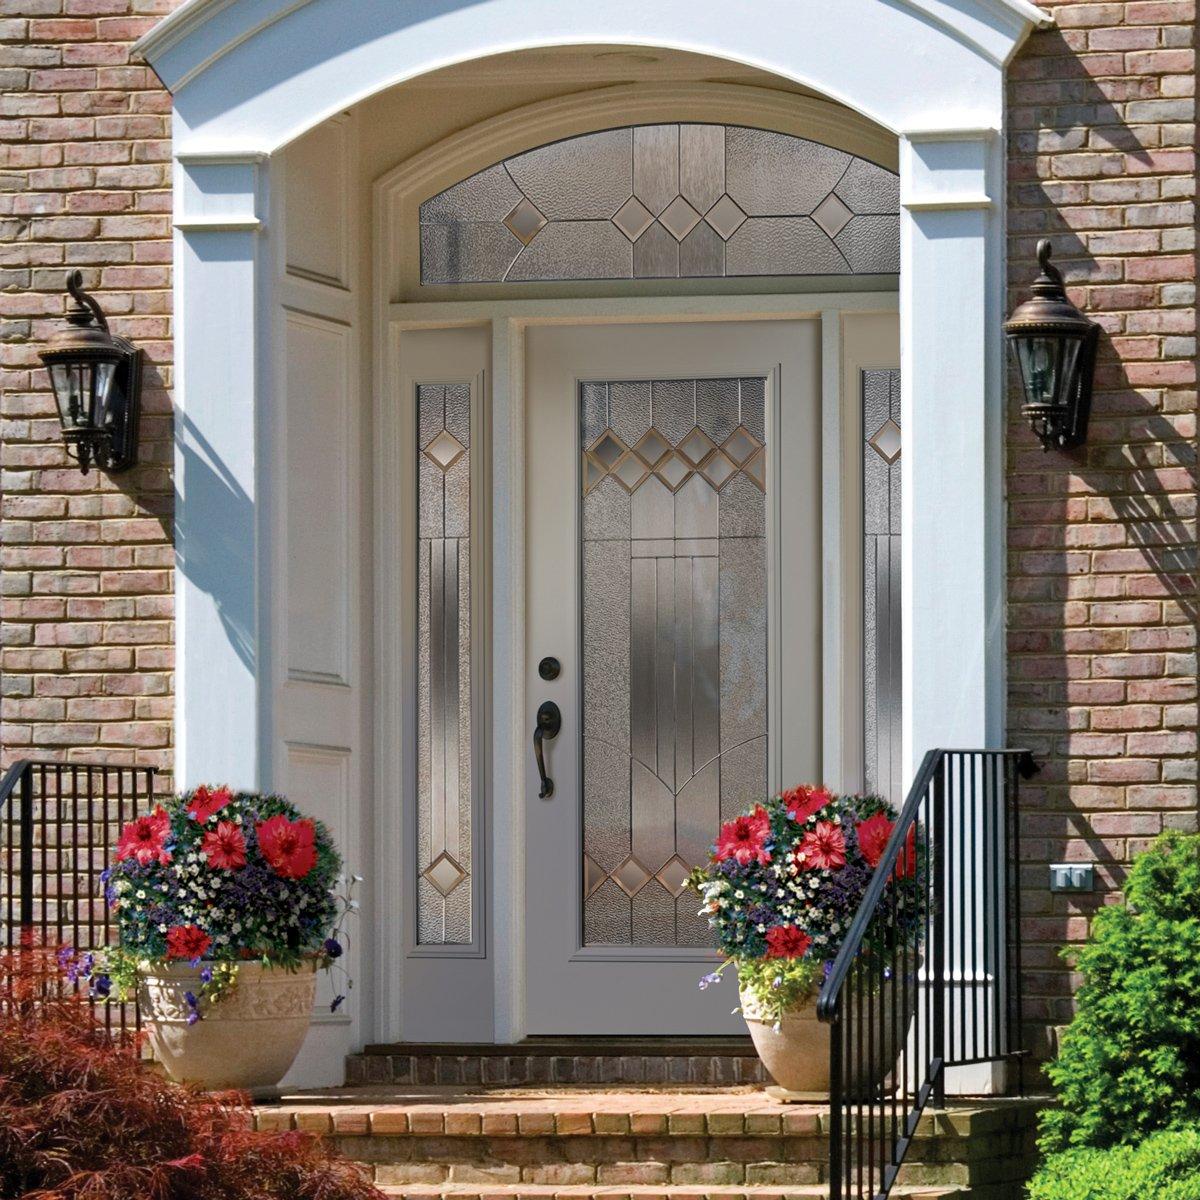 White steel door with sidelights and transom, inserts of decorative glass with grids.